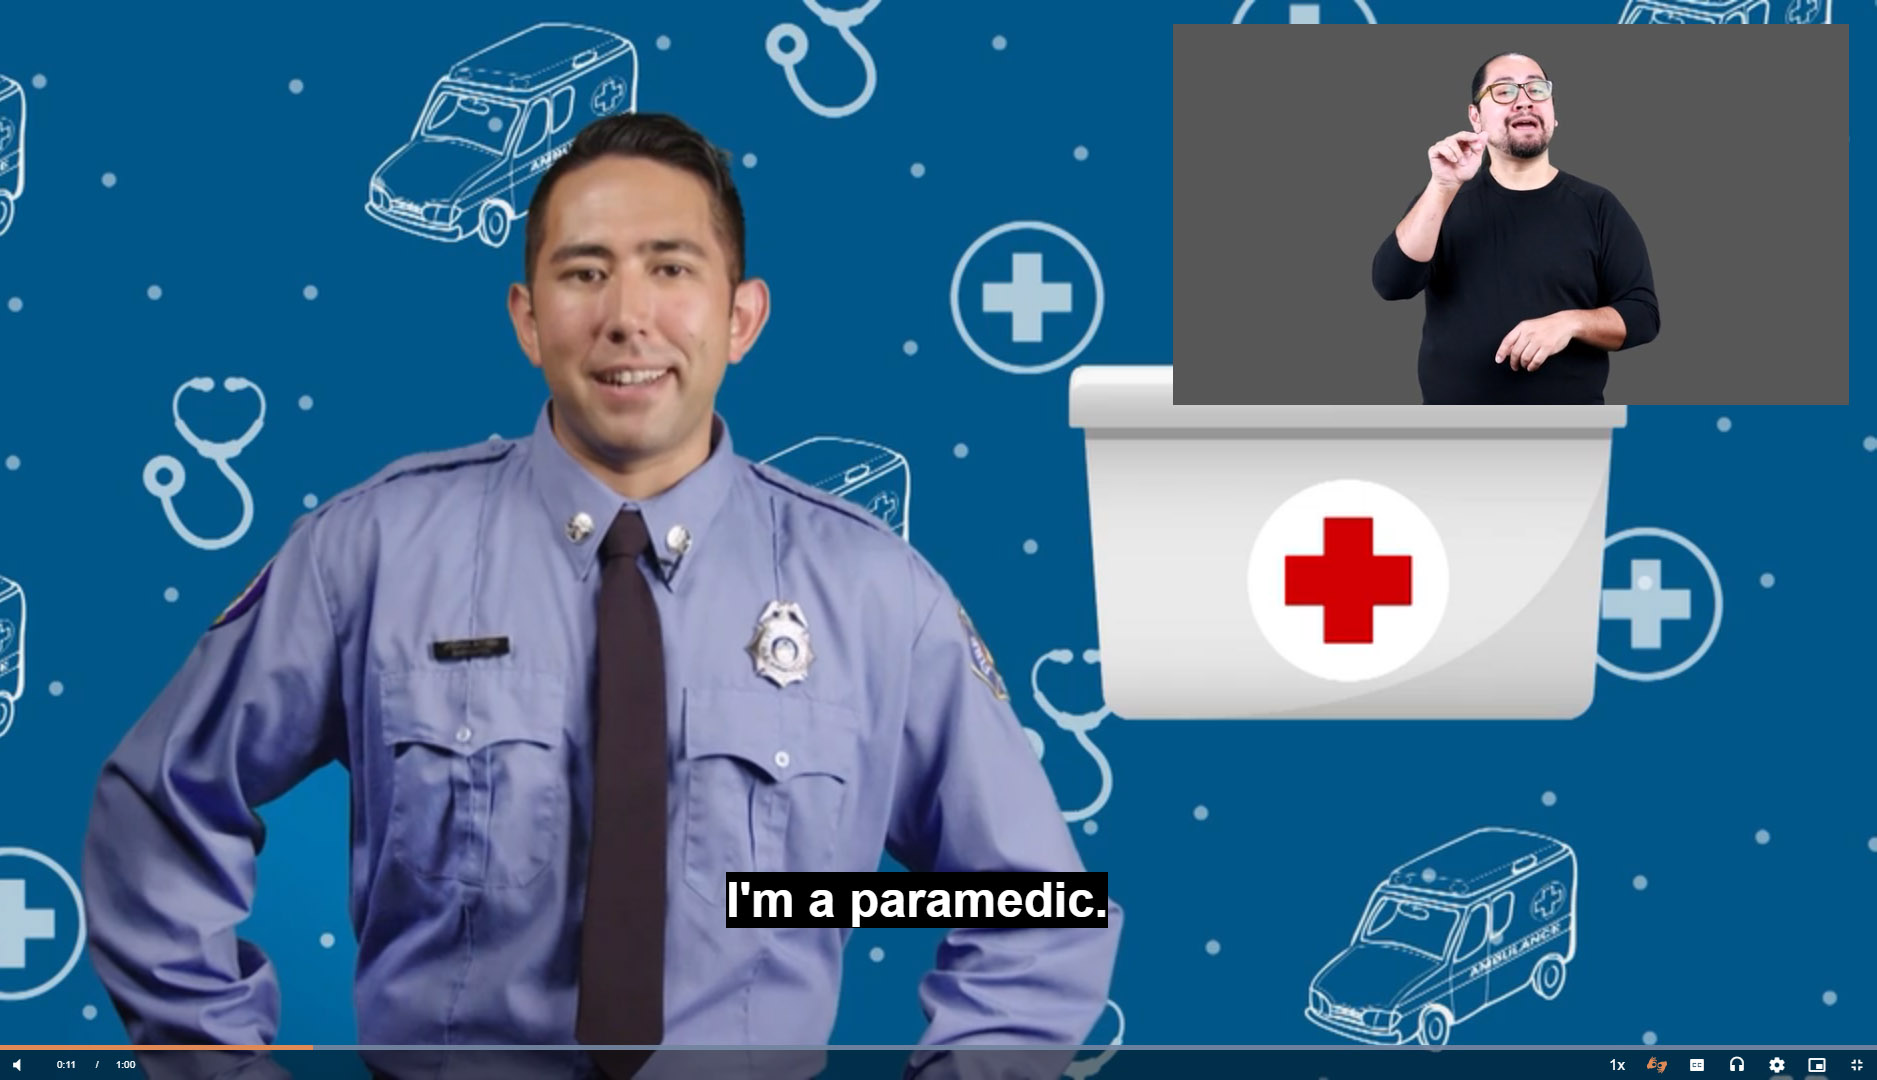 Full-screen educational video playing with a smaller window in the upper right hand corner showing a person using sign language.